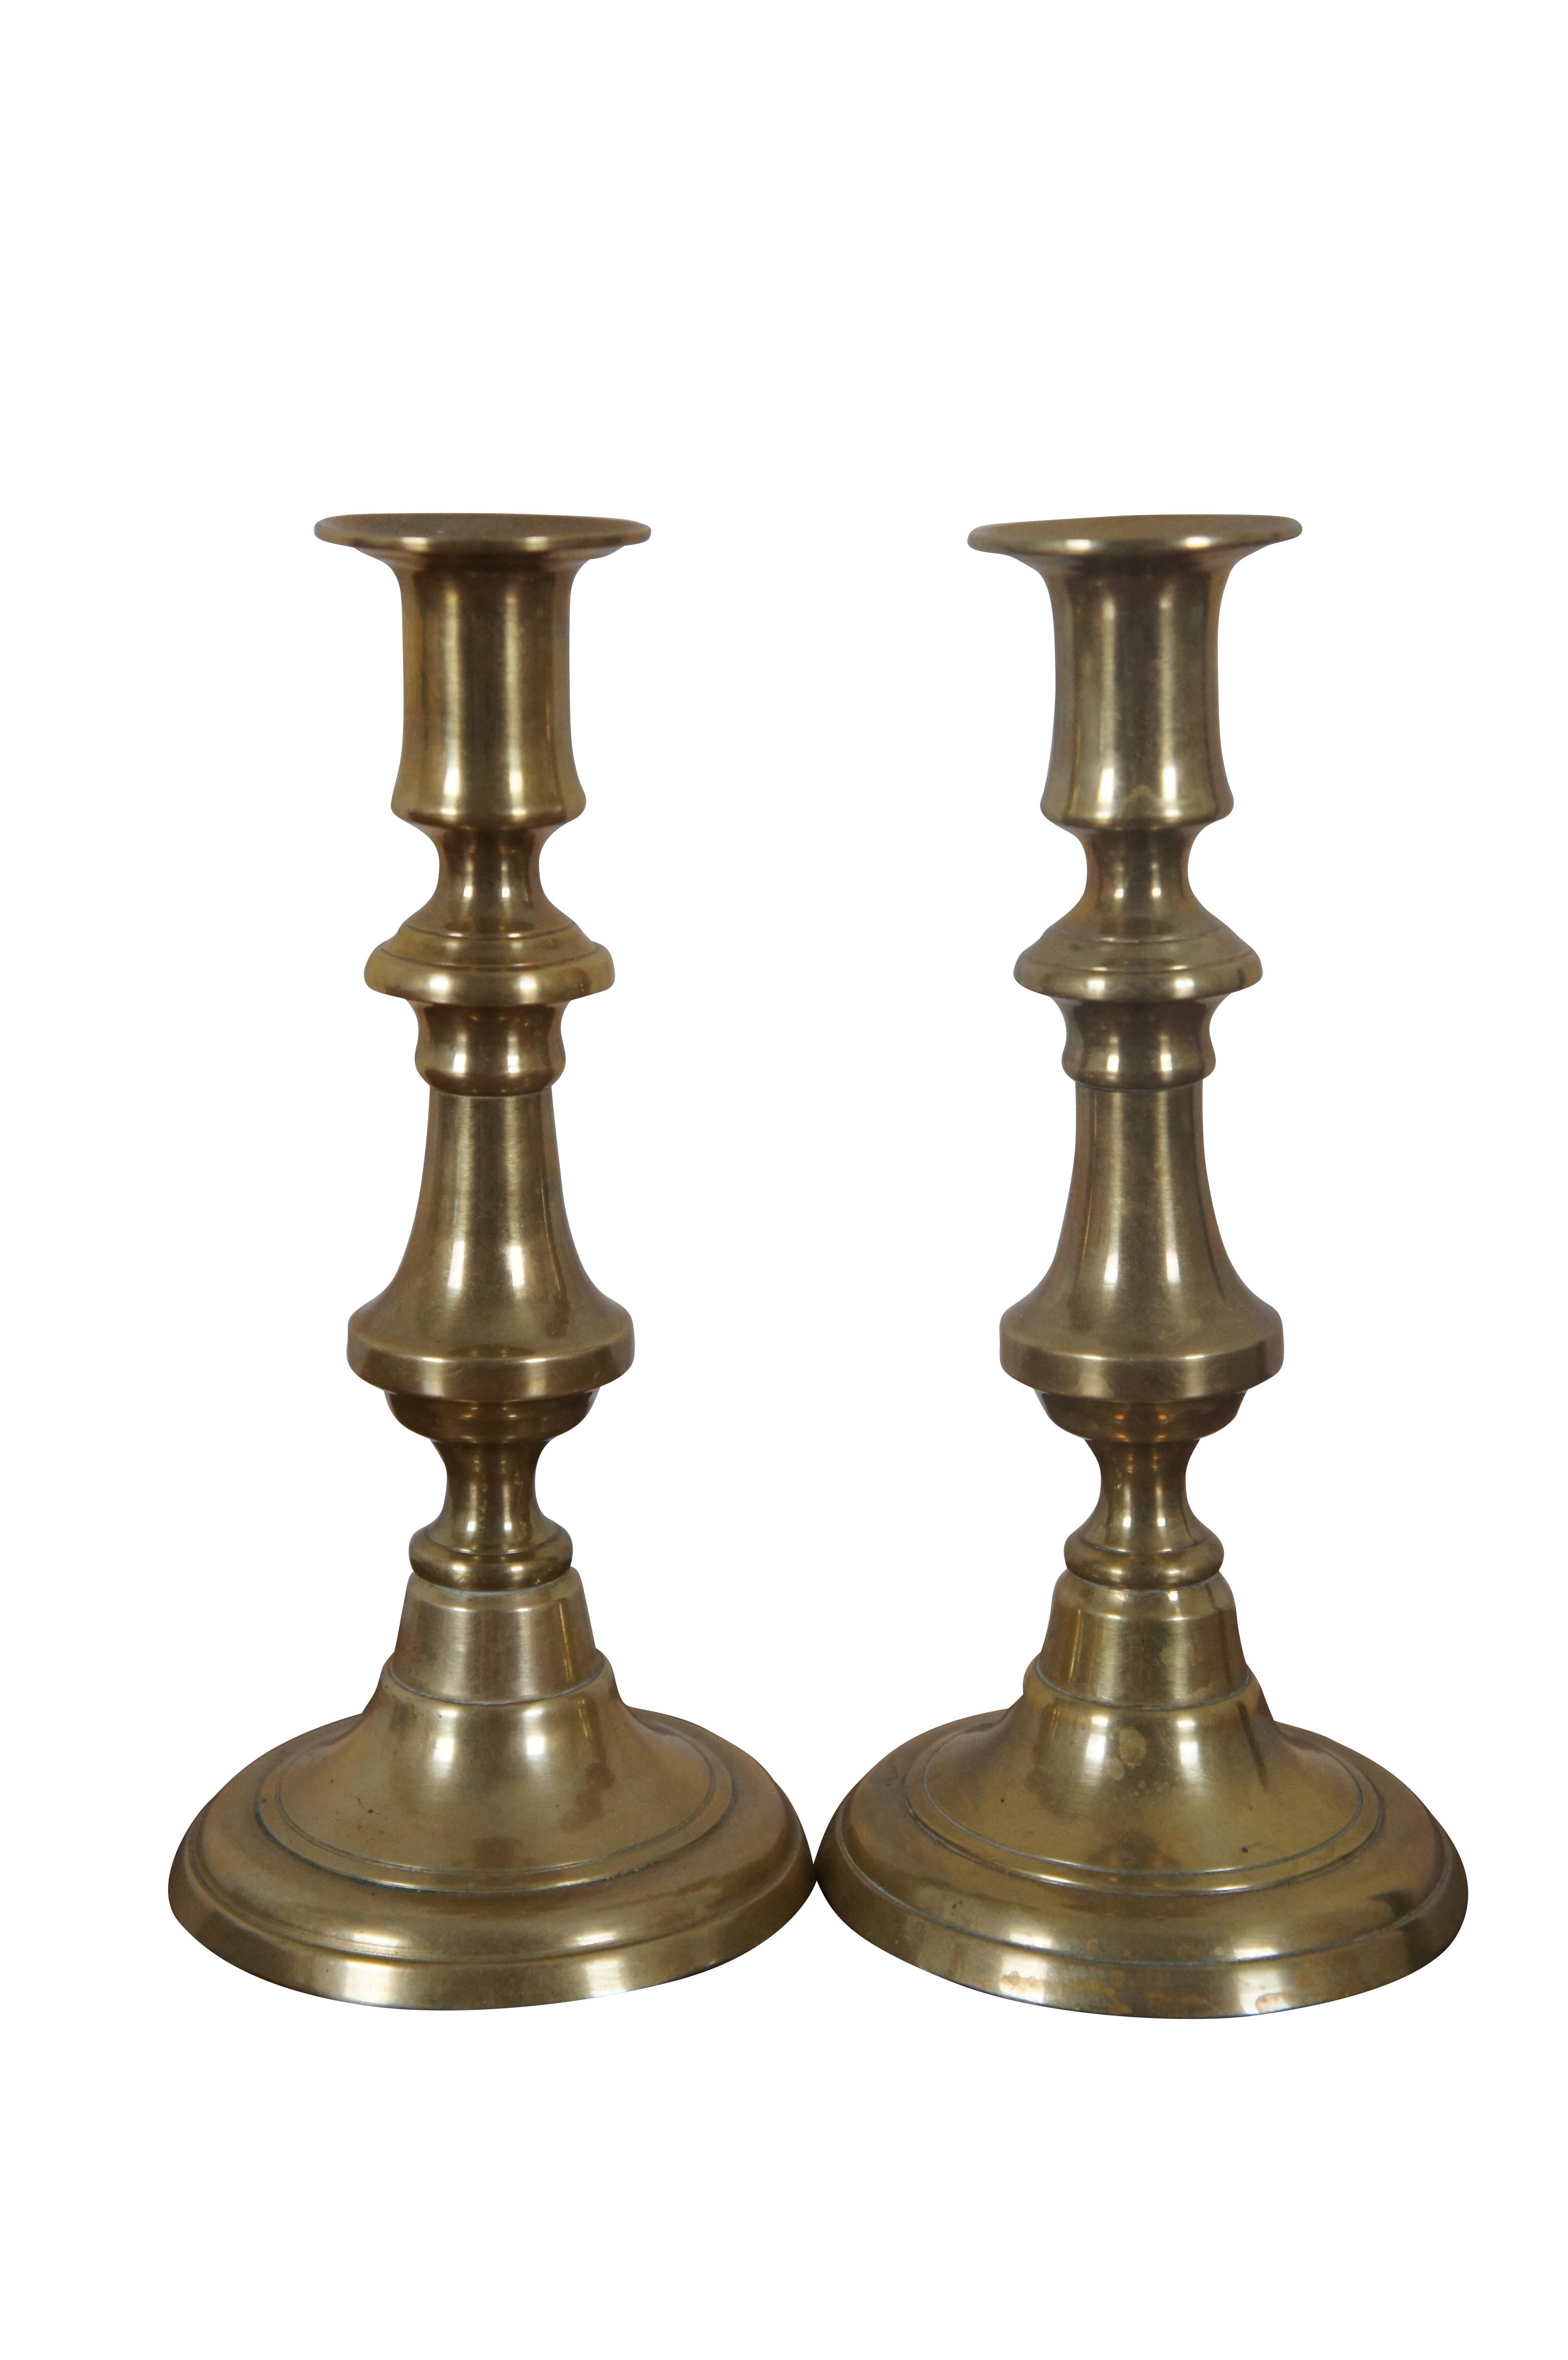 Three antique English brass candlesticks or candle holders featuring Queen Anne styling with push up rods.

Dimensions:
Tall - 3.75